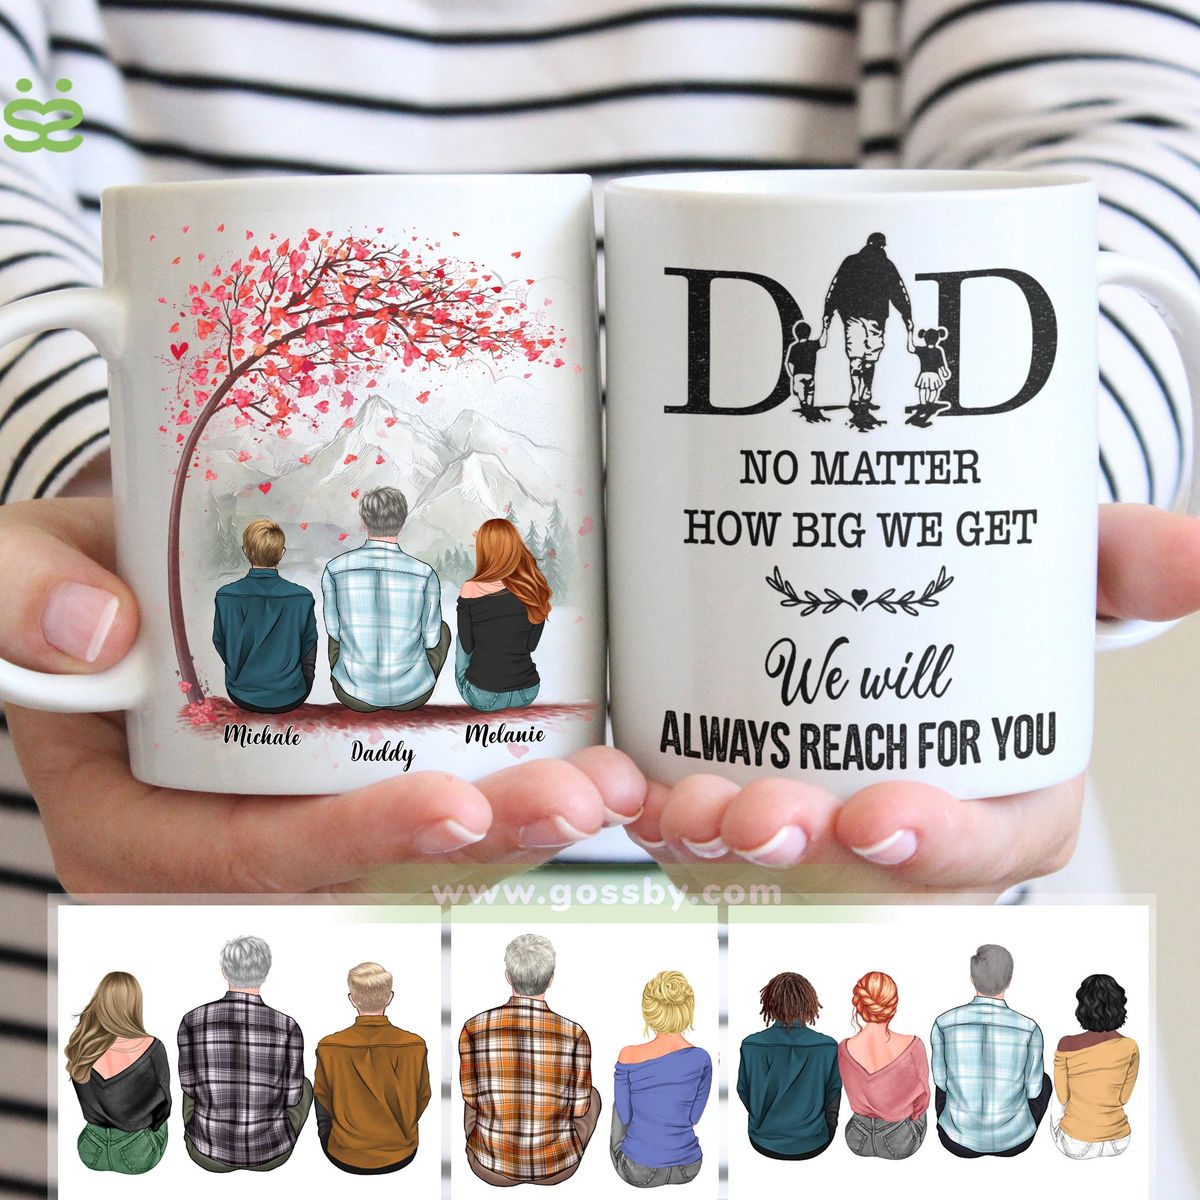 Personalized Mug - Father's Day Gifts - Dad & Children - Dad, No matter how big we get. We will always reach for you 2 - Mugs 1D1S